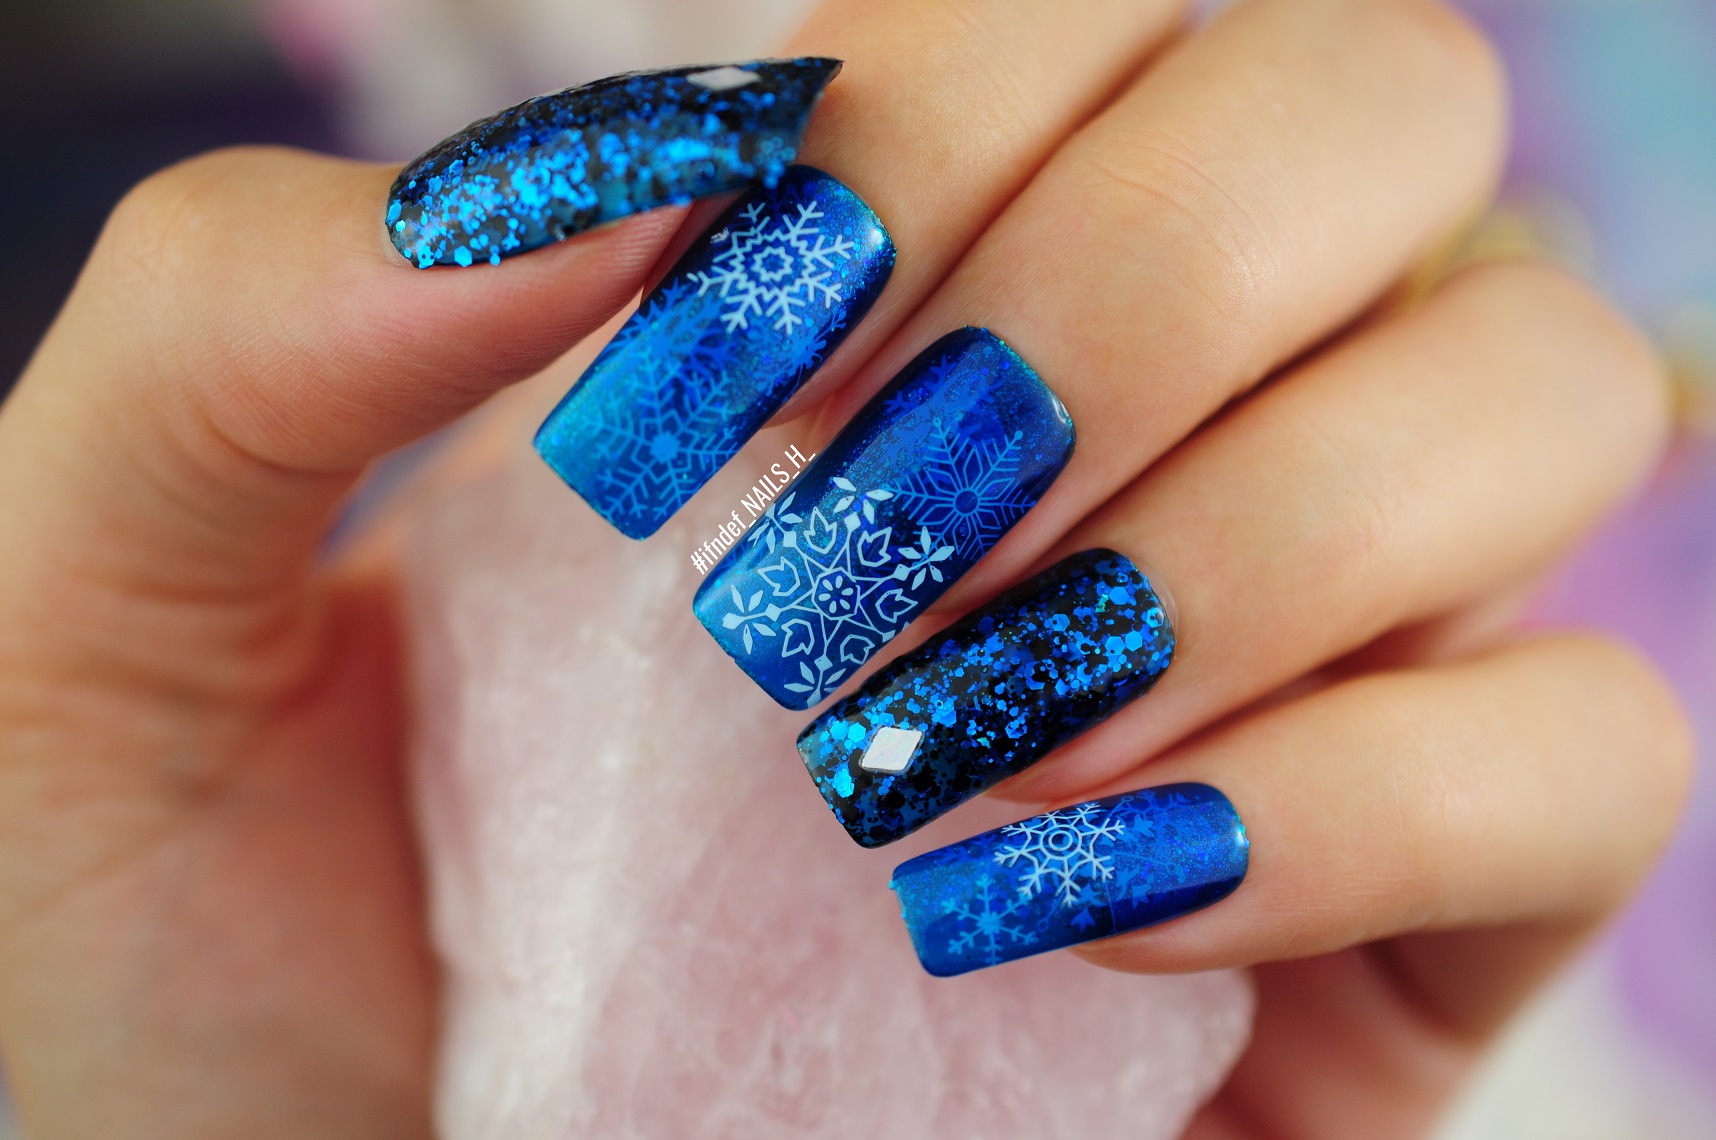 Snowflake Queen Blue Snowflake Jelly Winter Look with Glitter